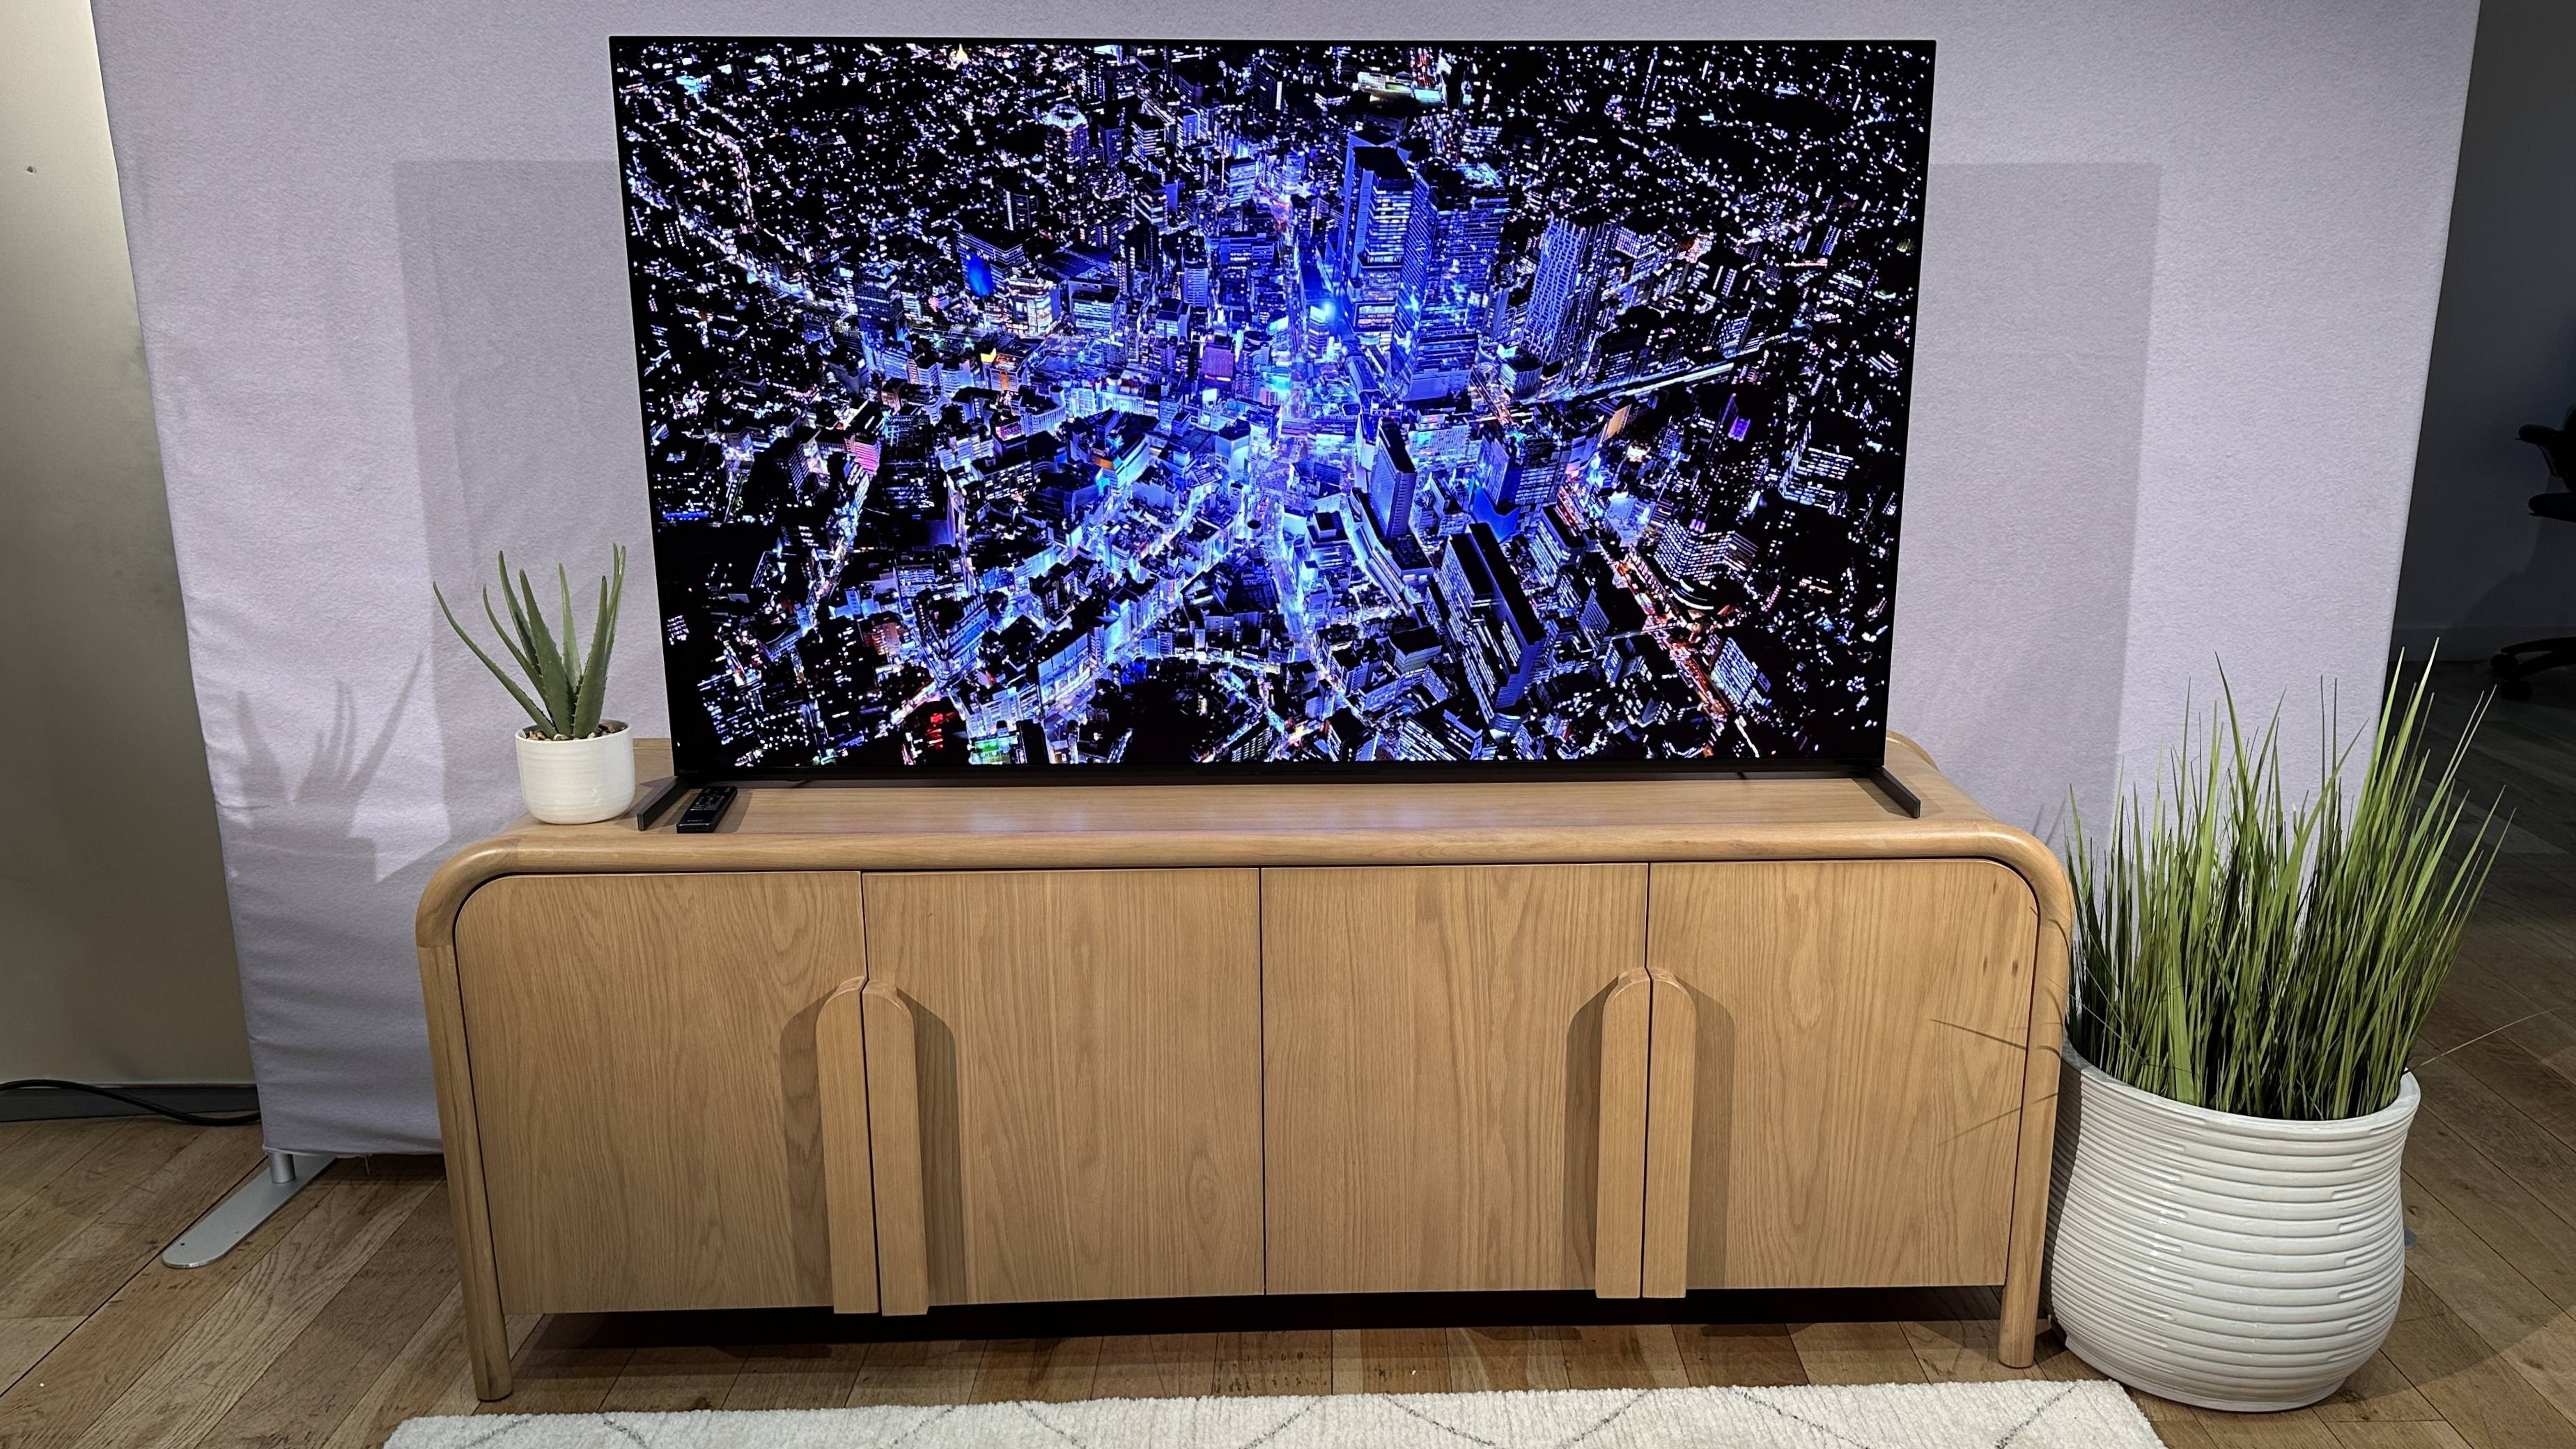 Sony adds nine 4K HDR models to 2016 TV line-up